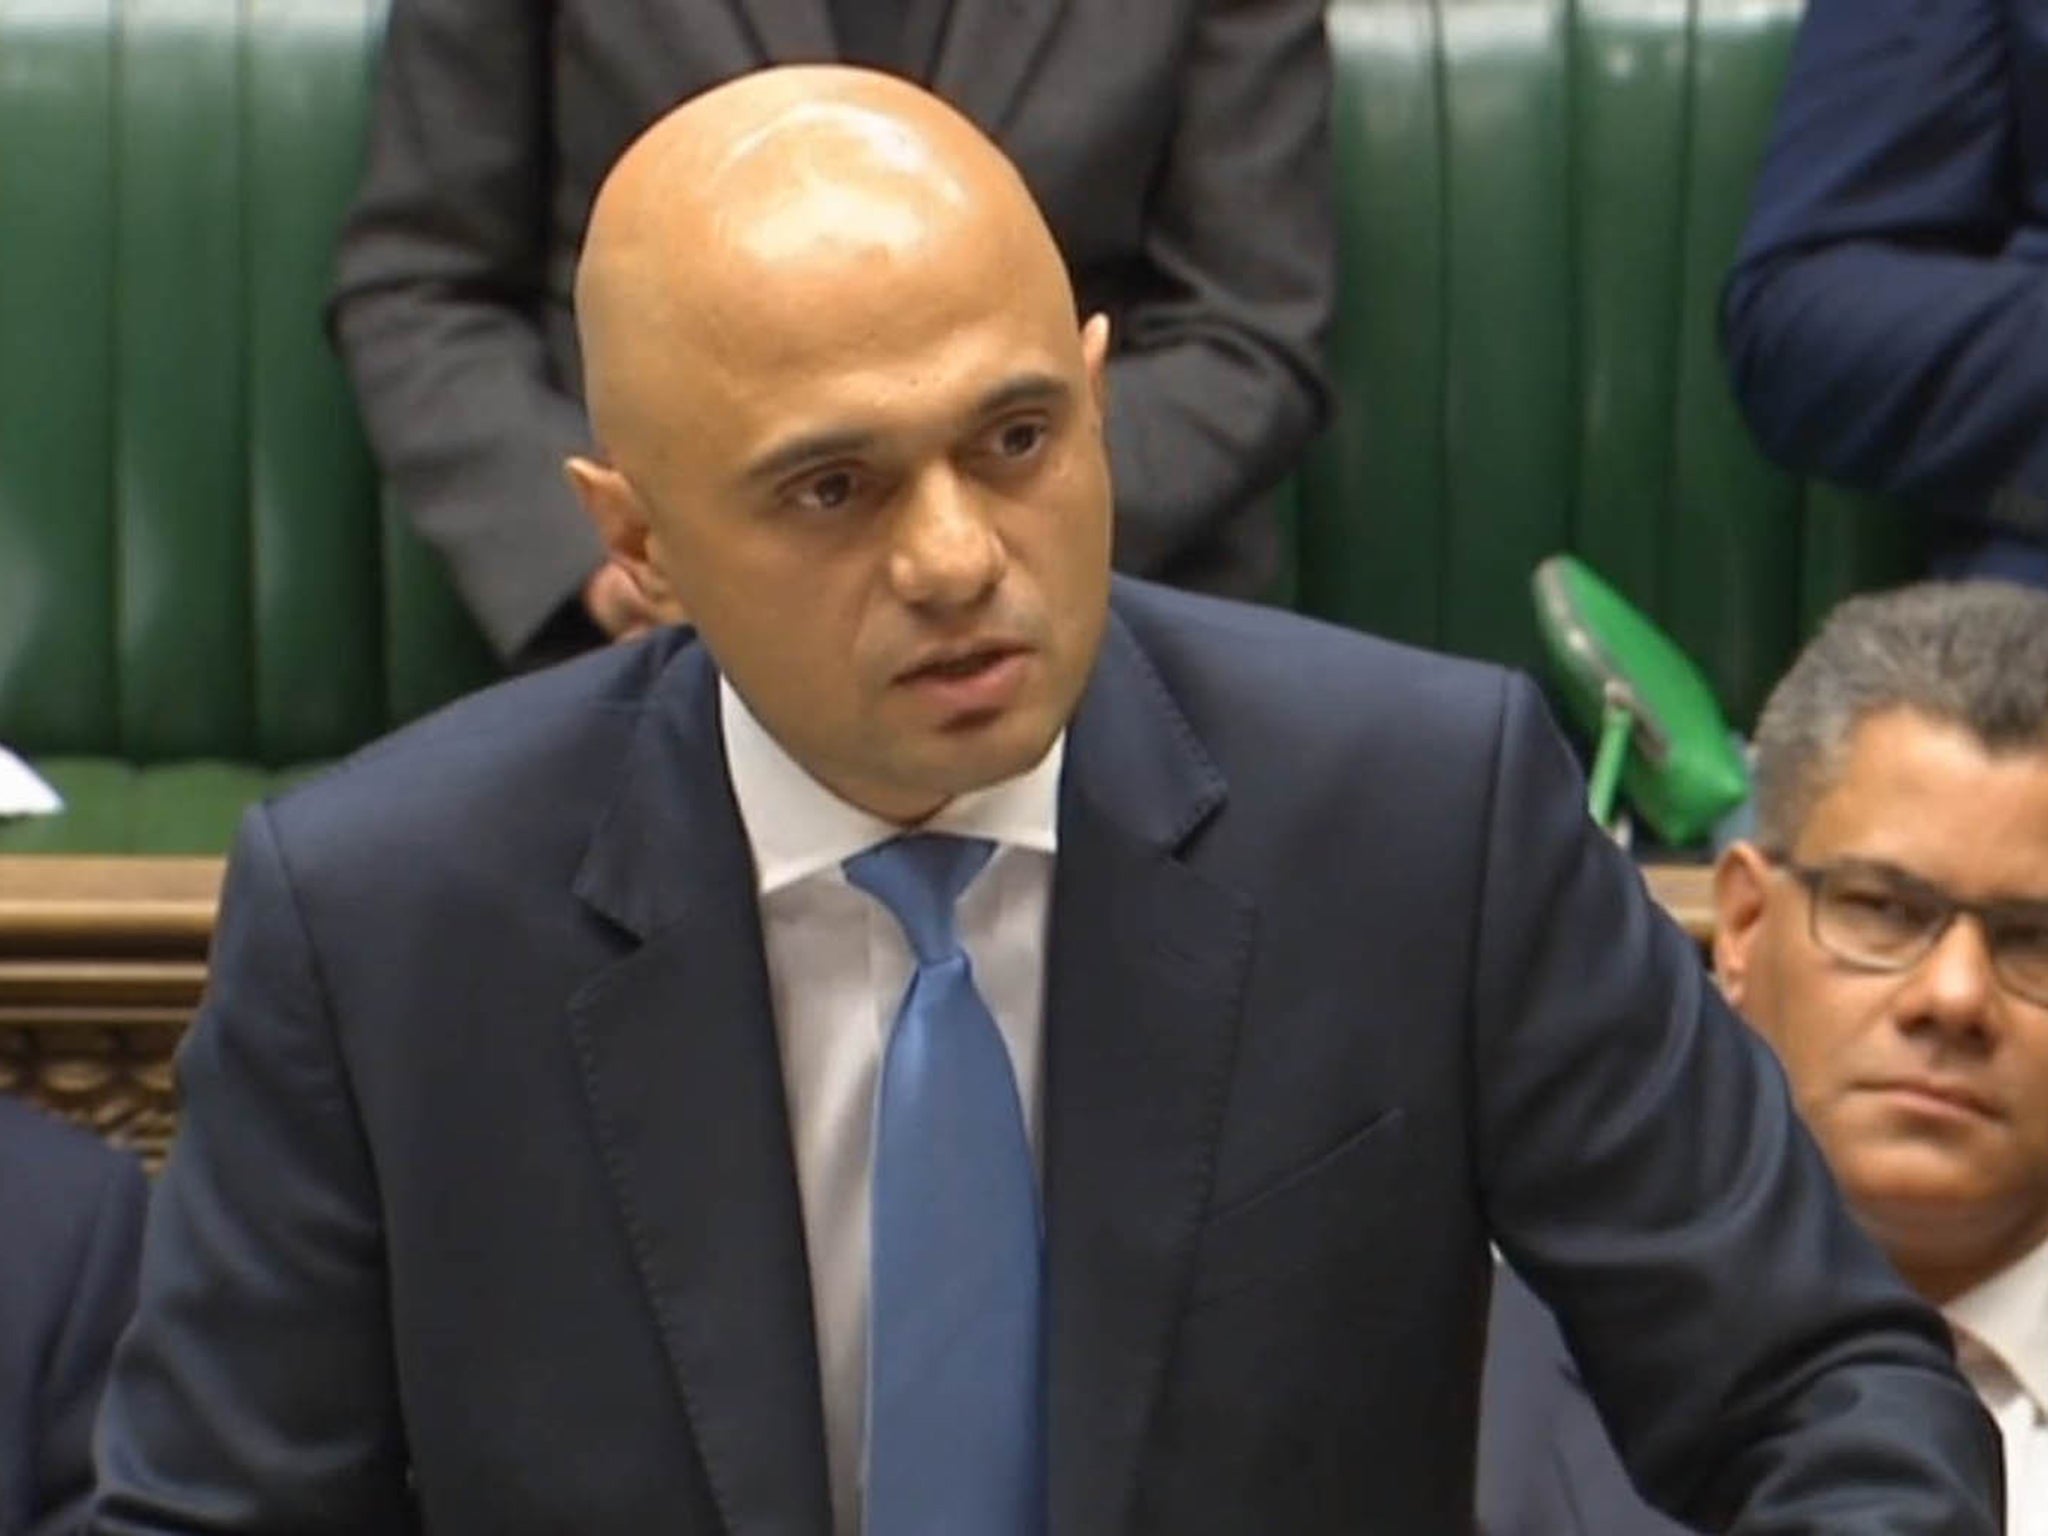 Sajid Javid, Communities and Local Government Secretary, sought to justify the new move – which The Taxpayers’ Alliance said ‘beggars belief’